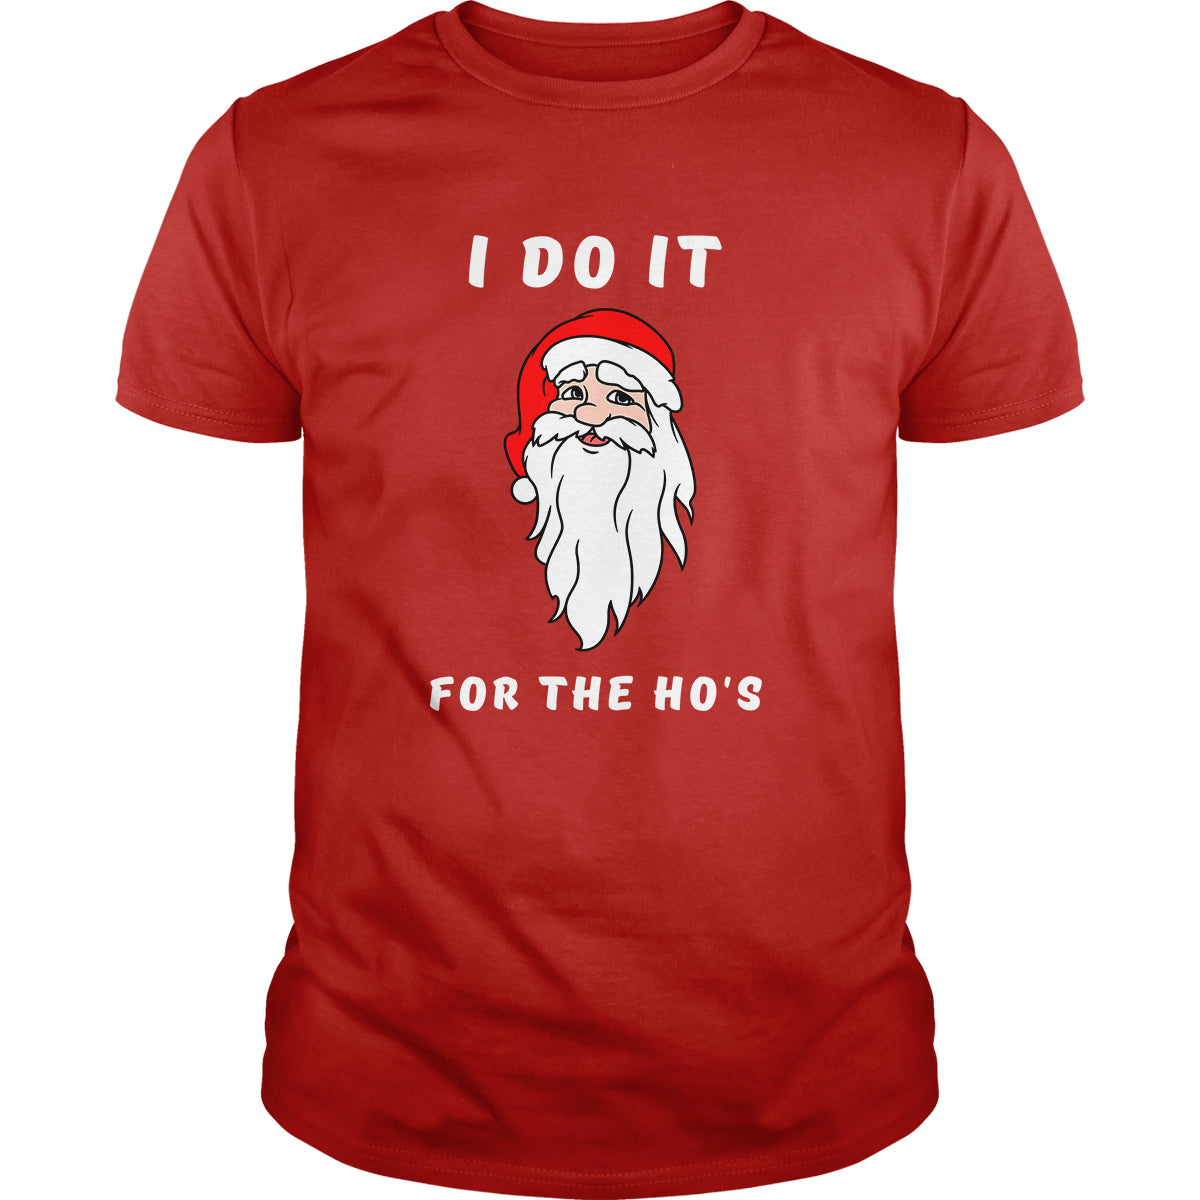 I DO IT FOR THE HO'S - BustedTees.com